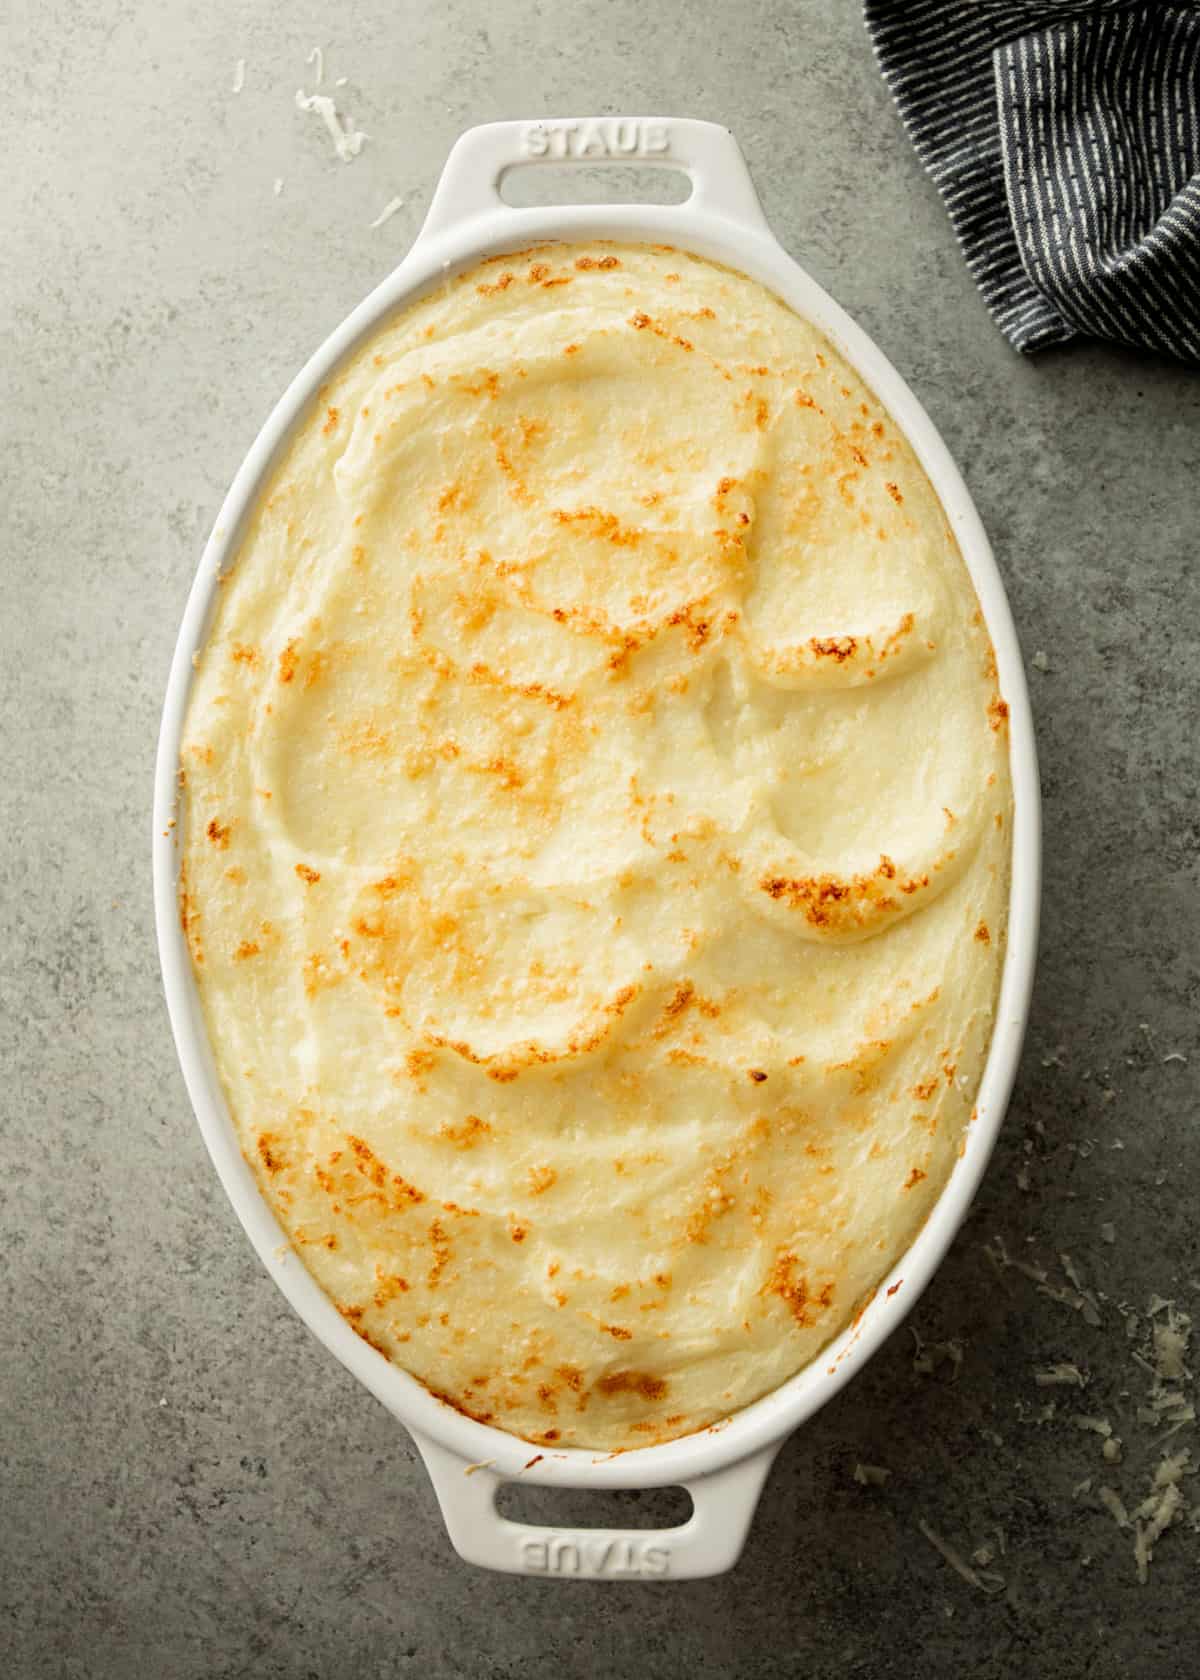 mashed potatoes in a white oval baking dish